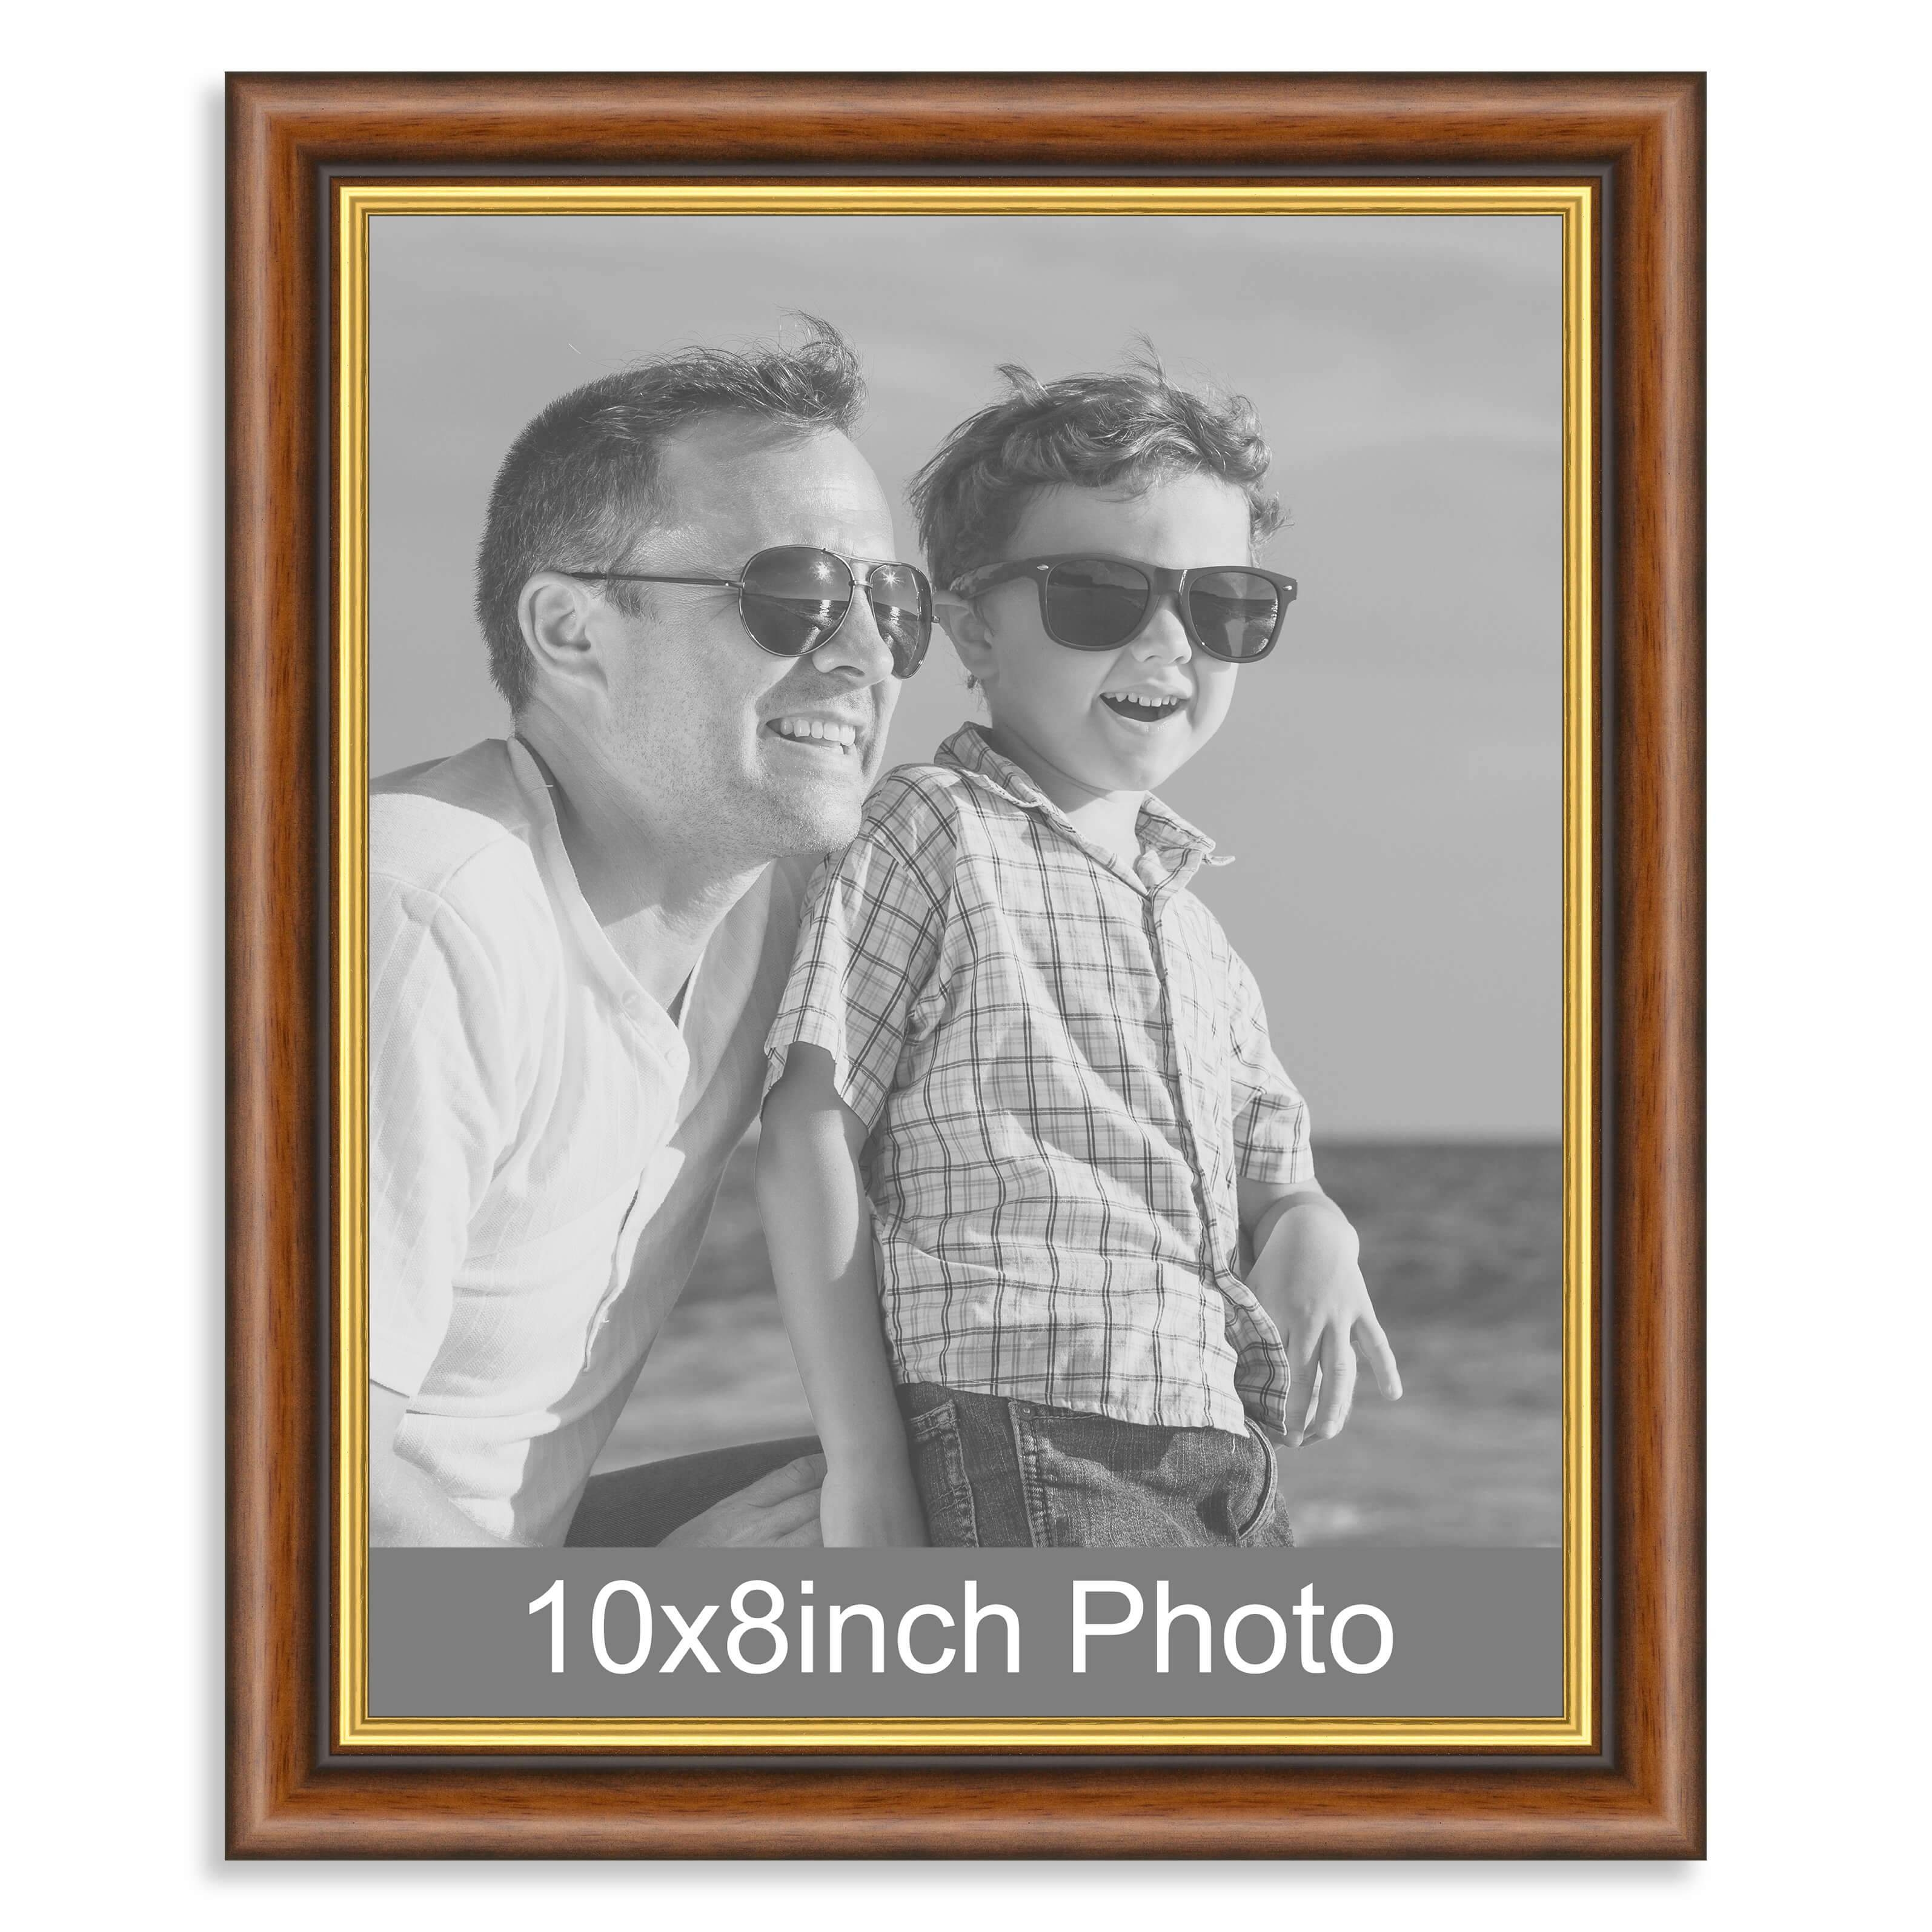 10 x 8inch Mahogany & Gold Wooden Photo Frame for a 10×8/8x10in image